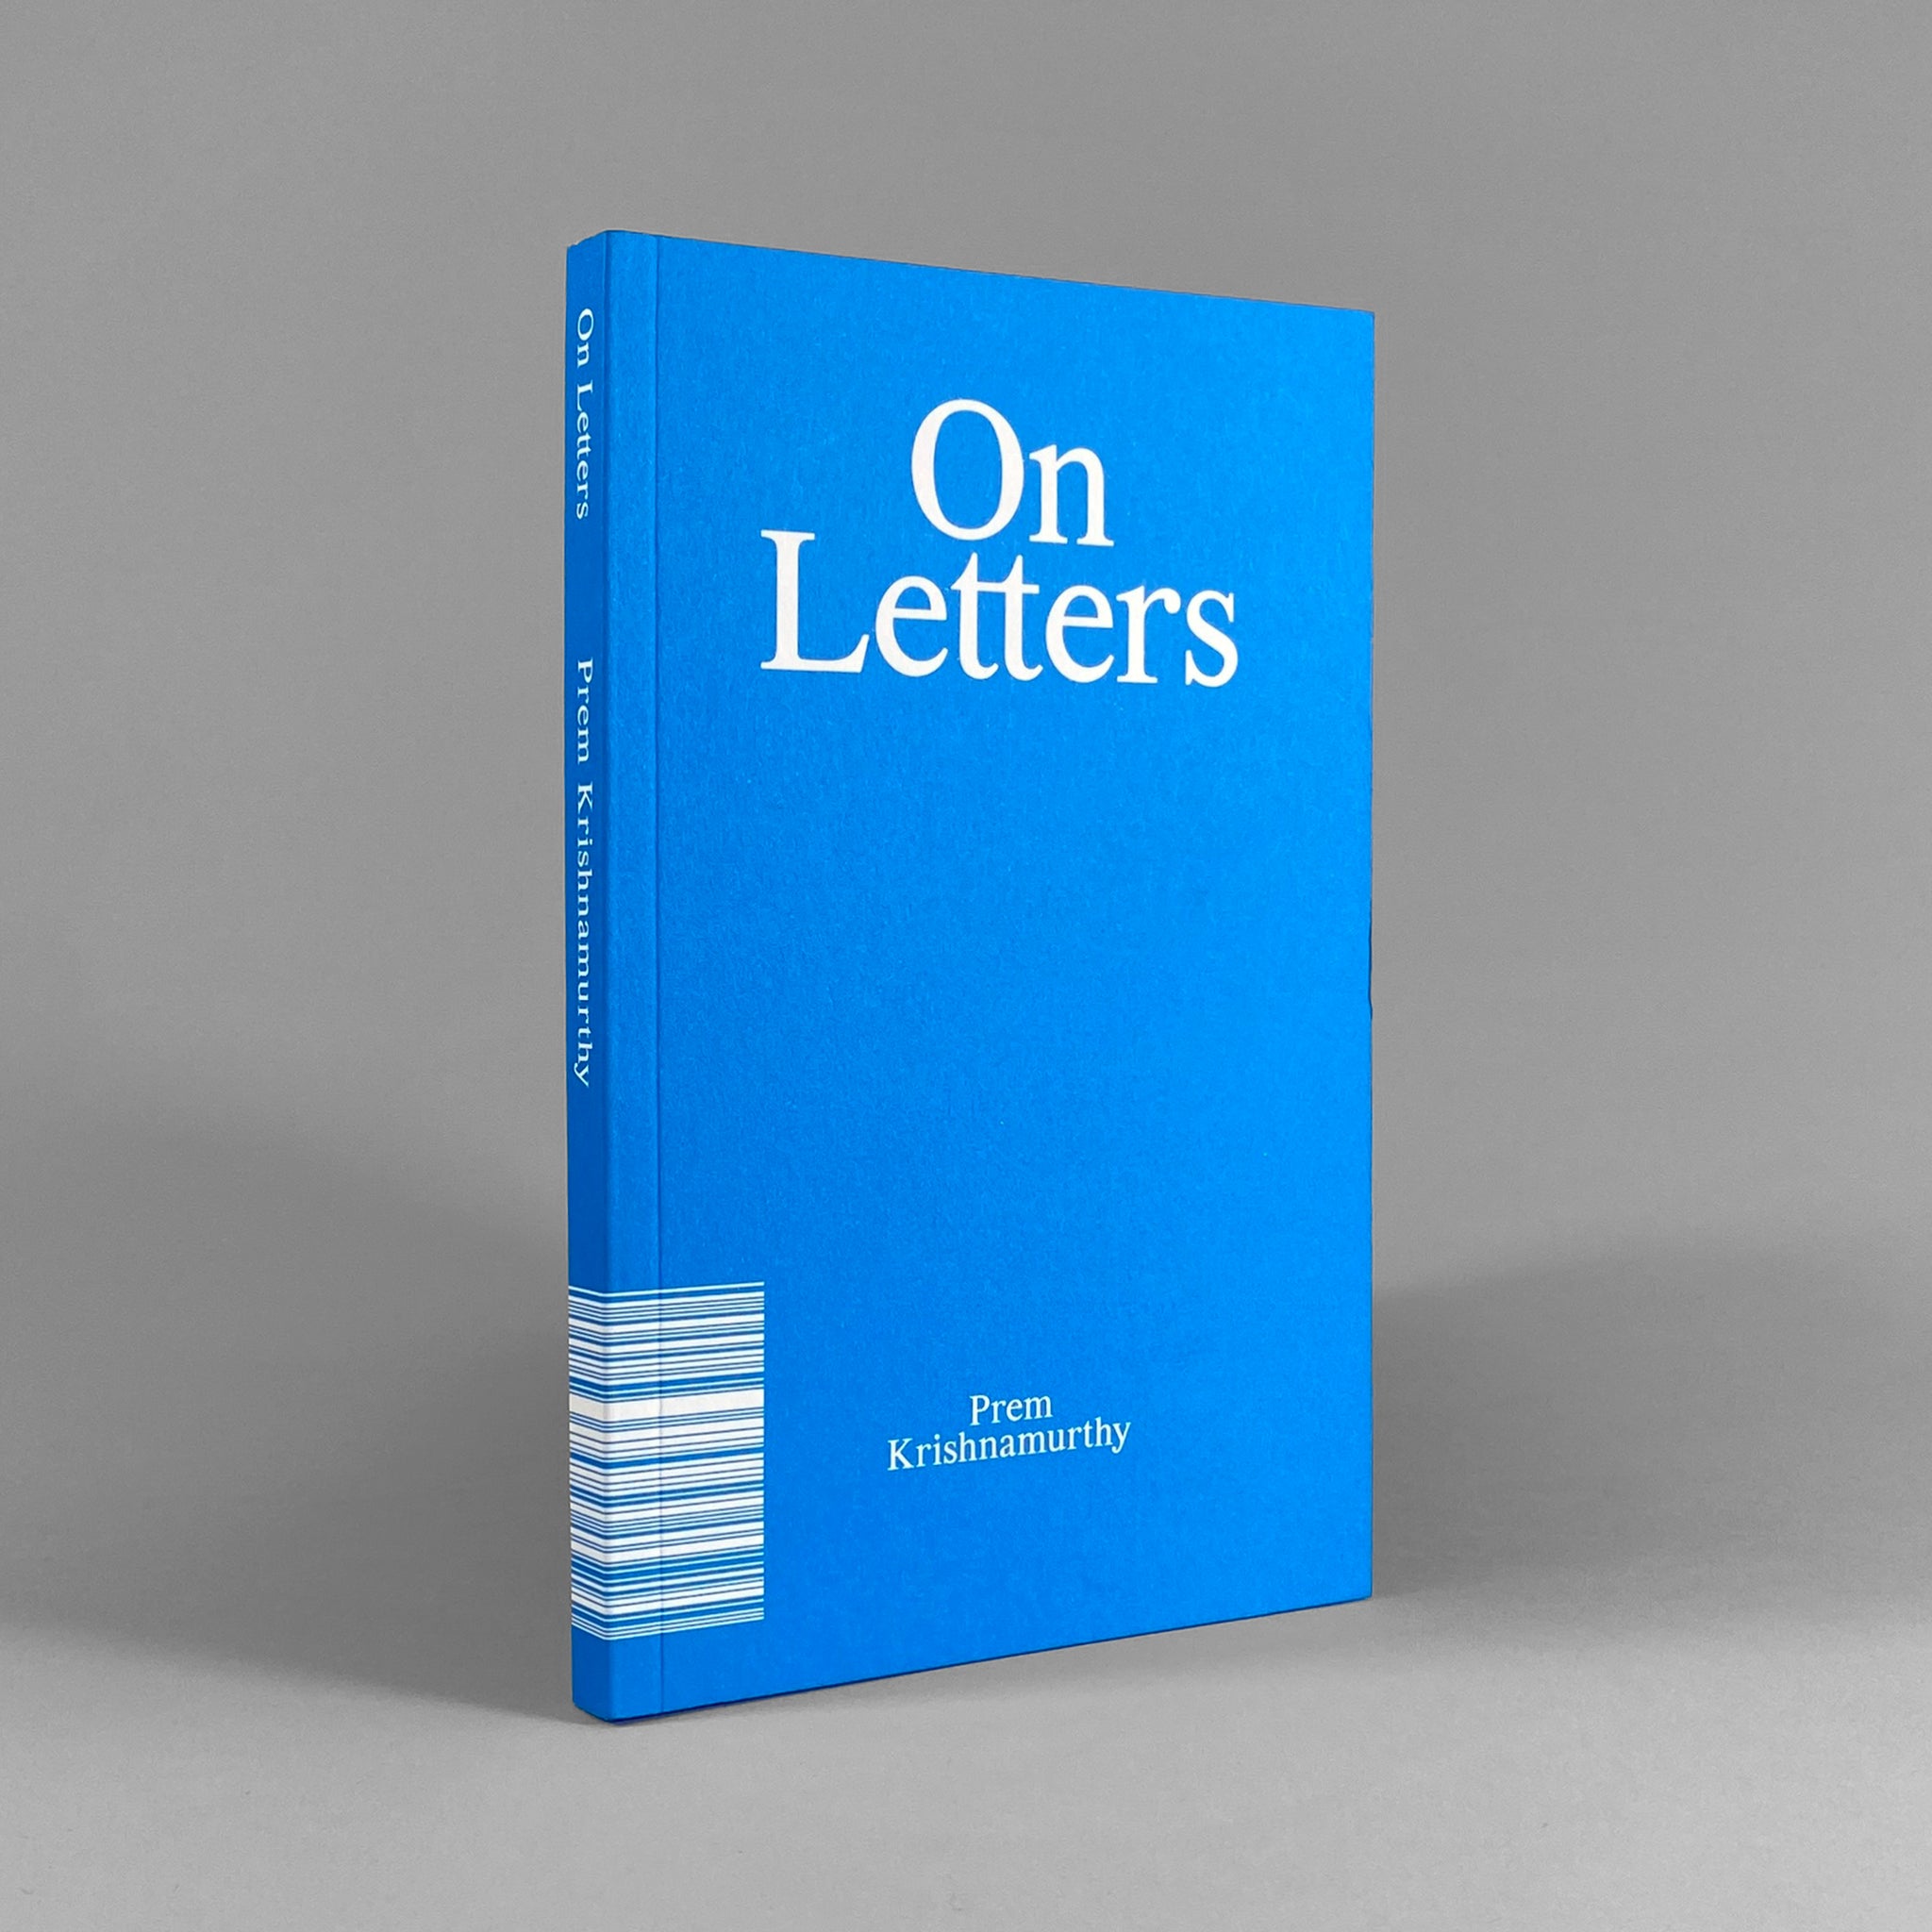 On Letters